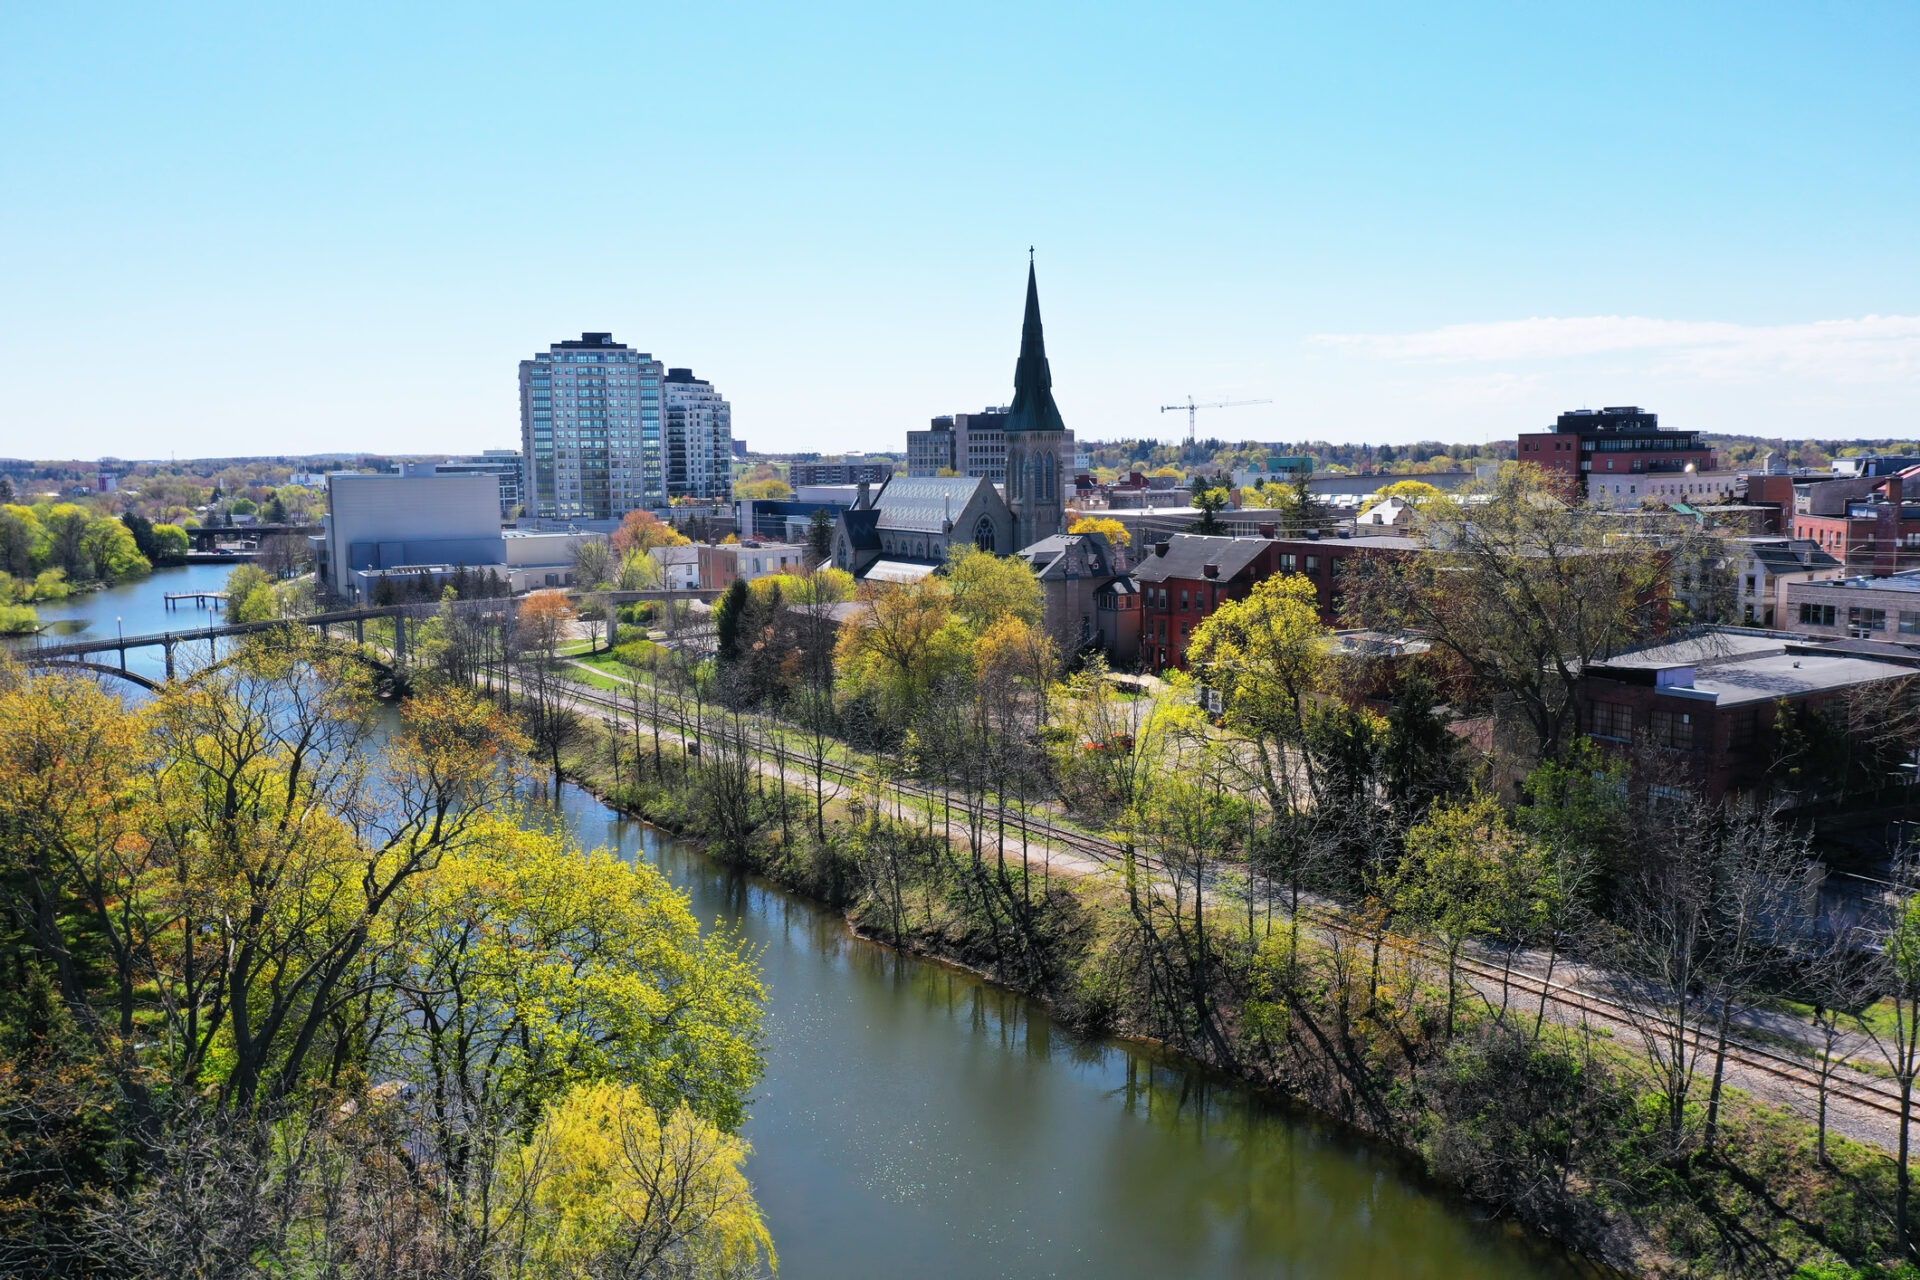 An aerial view of an urban landscape with a river, green foliage, a church spire, modern buildings, and clear blue skies.